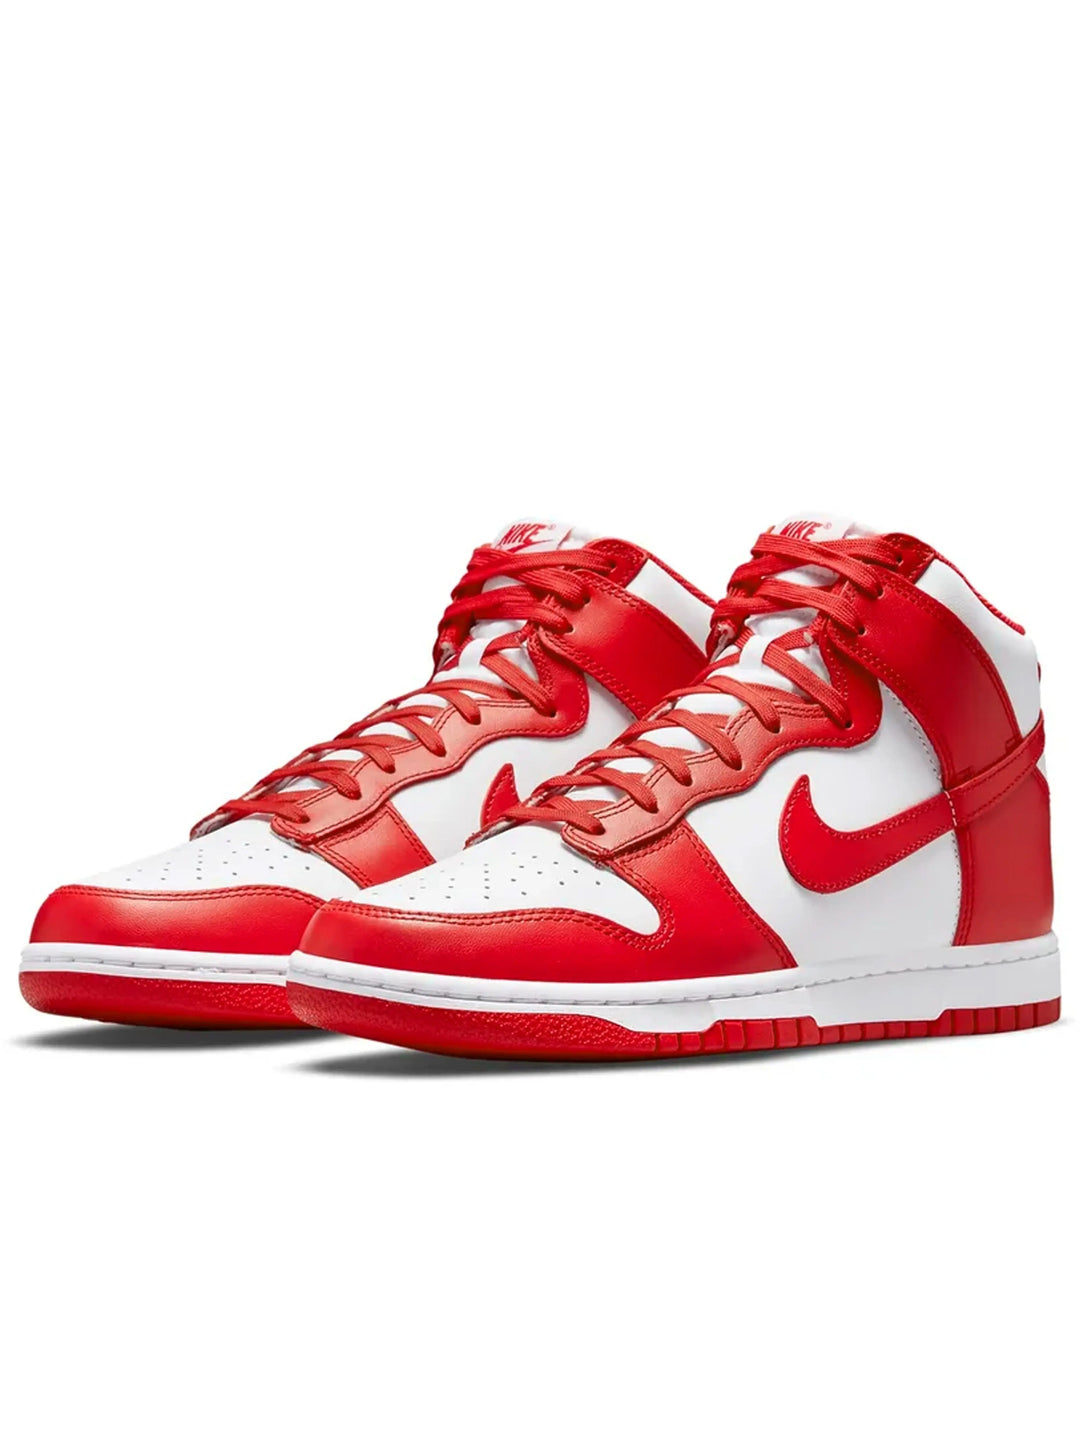 Nike Dunk High Championship Red Prior